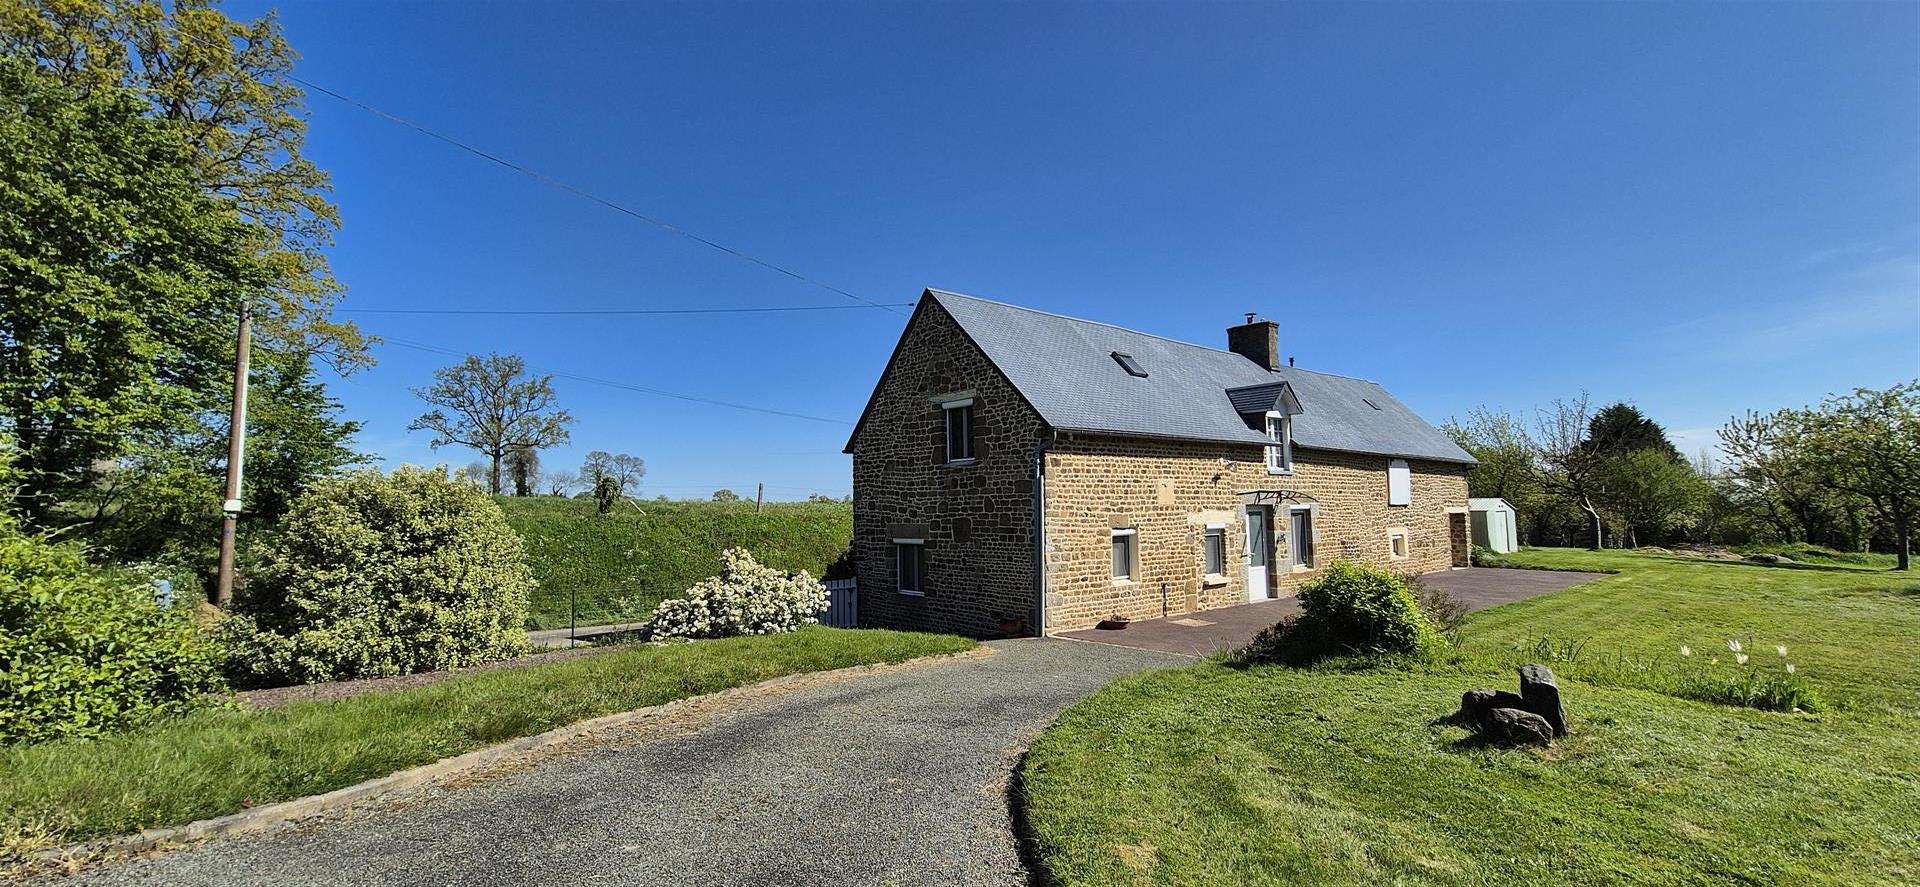 Detached character 2 bed habitable stone longere with attic for possible conversion + 2 outbuildings